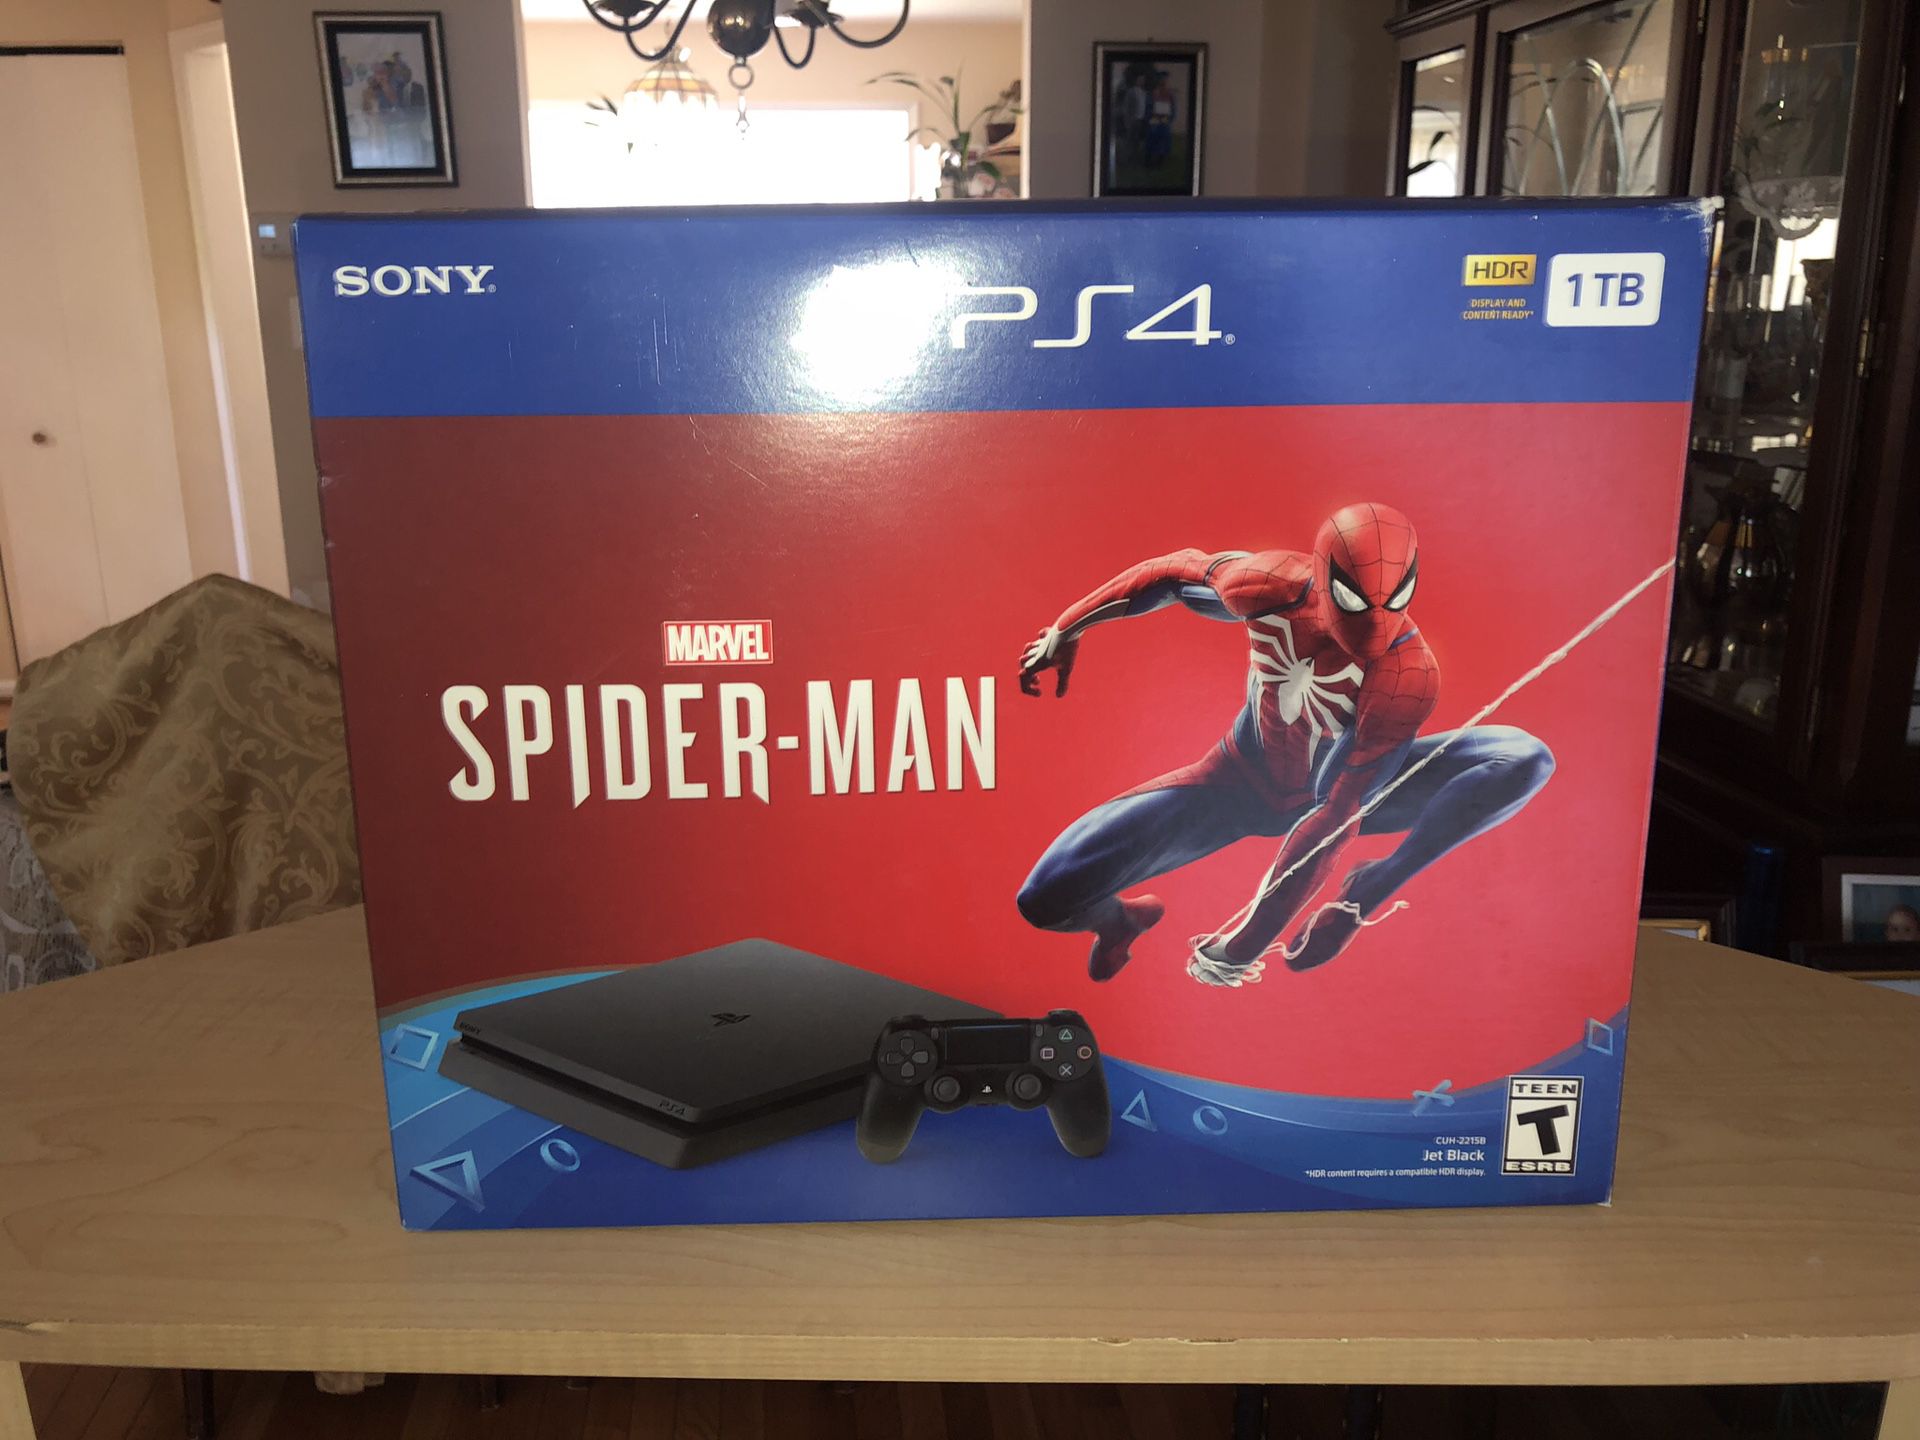 Sony PS4 1TB Bundle with Spider-Man Game